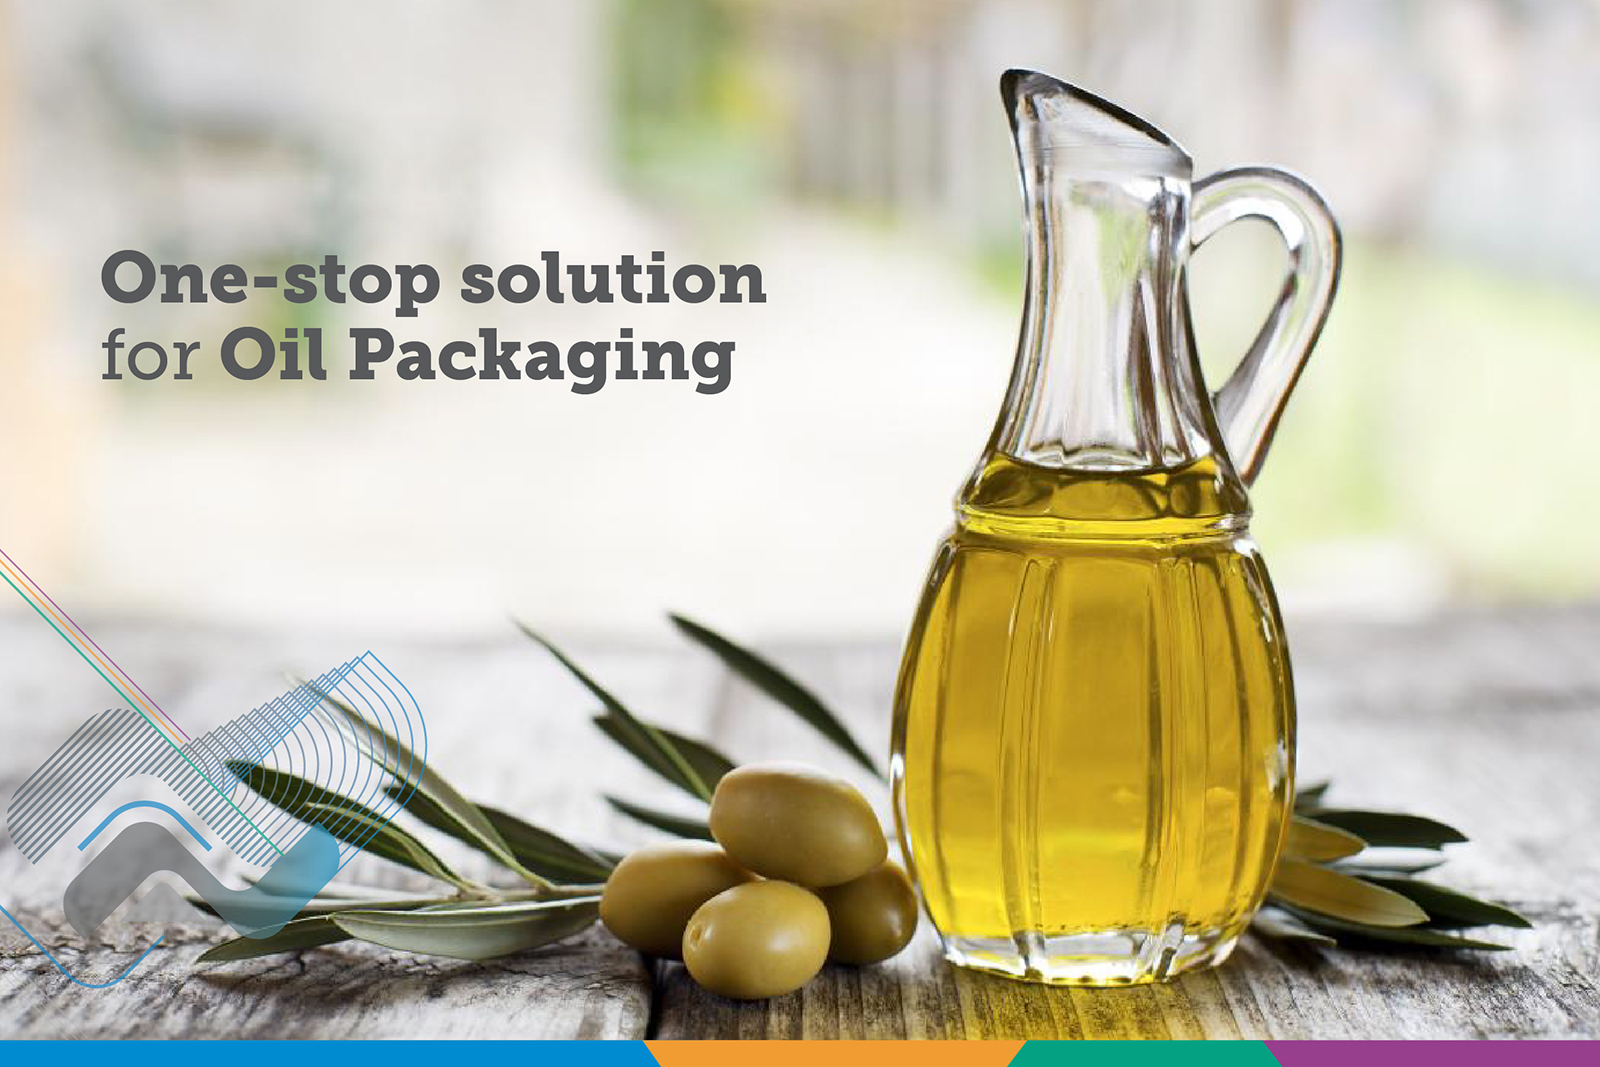 One-stop solution for Oil Packaging